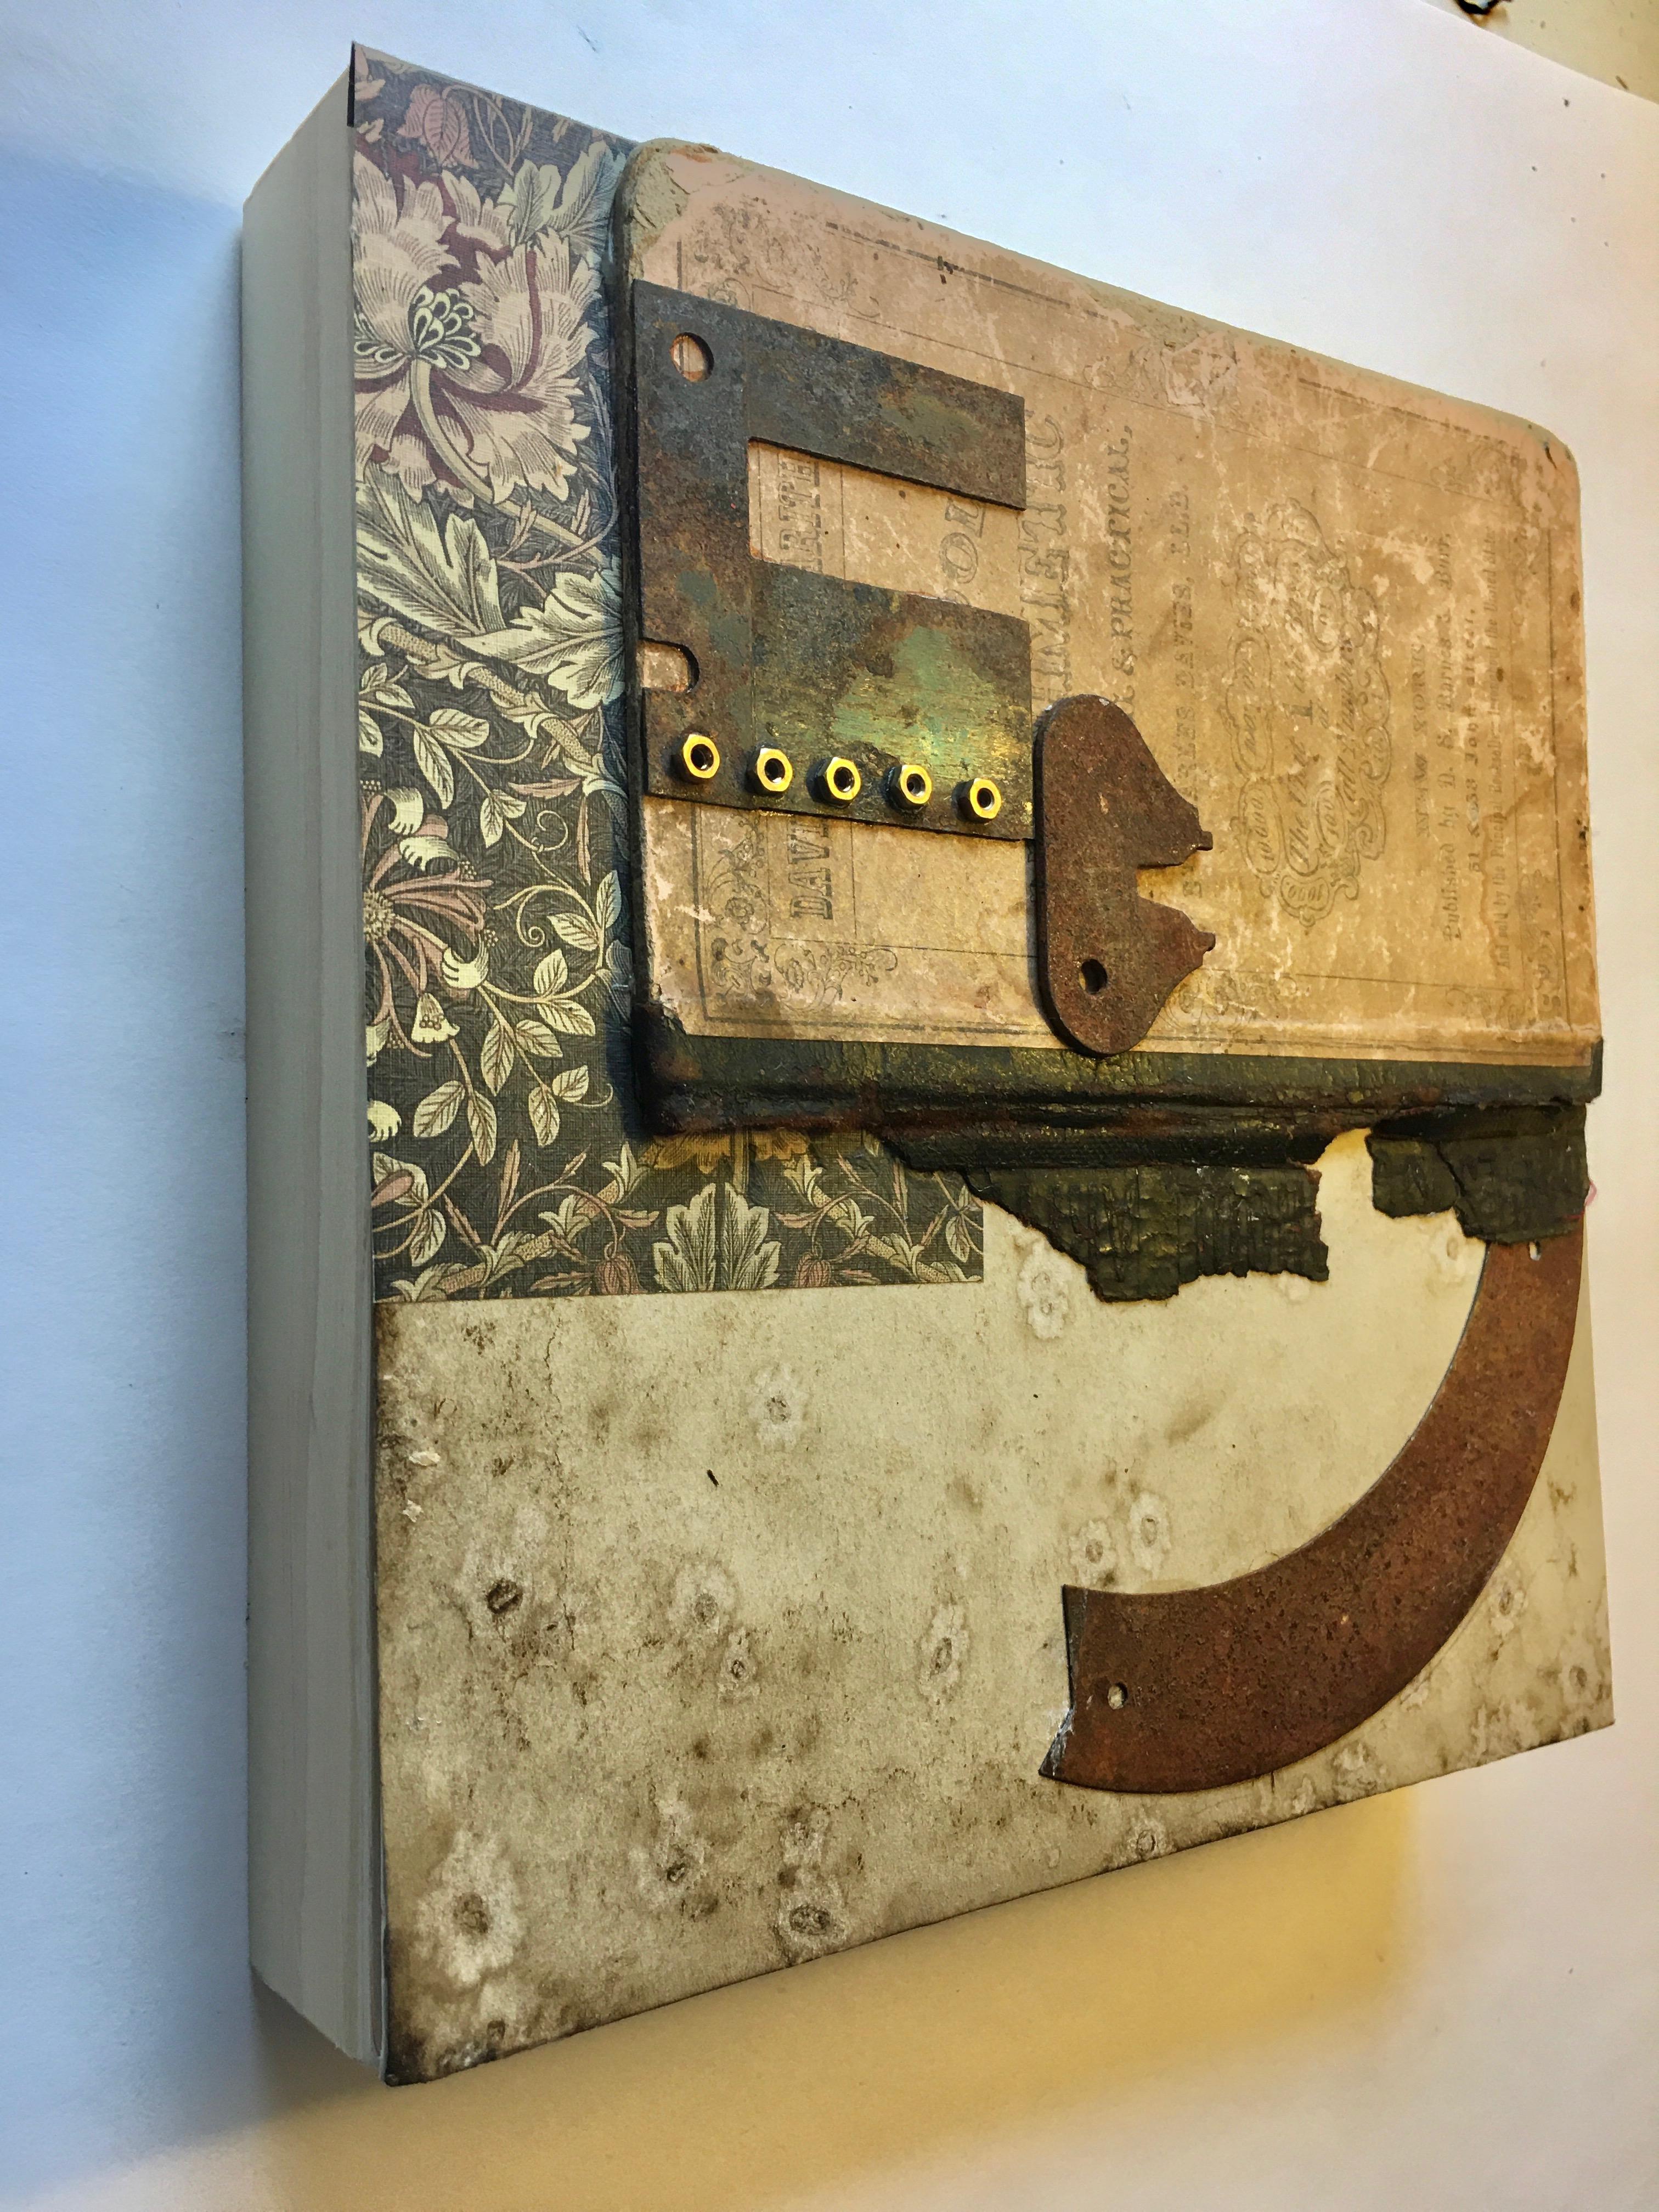 Contemporary work of art by Christine Graf.

A collage work of art created using rust, canvas and book. Graf skillfully employs unconventional materials and everyday objects when creating her mesmerizing pieces. Her work is very tactile and complex,